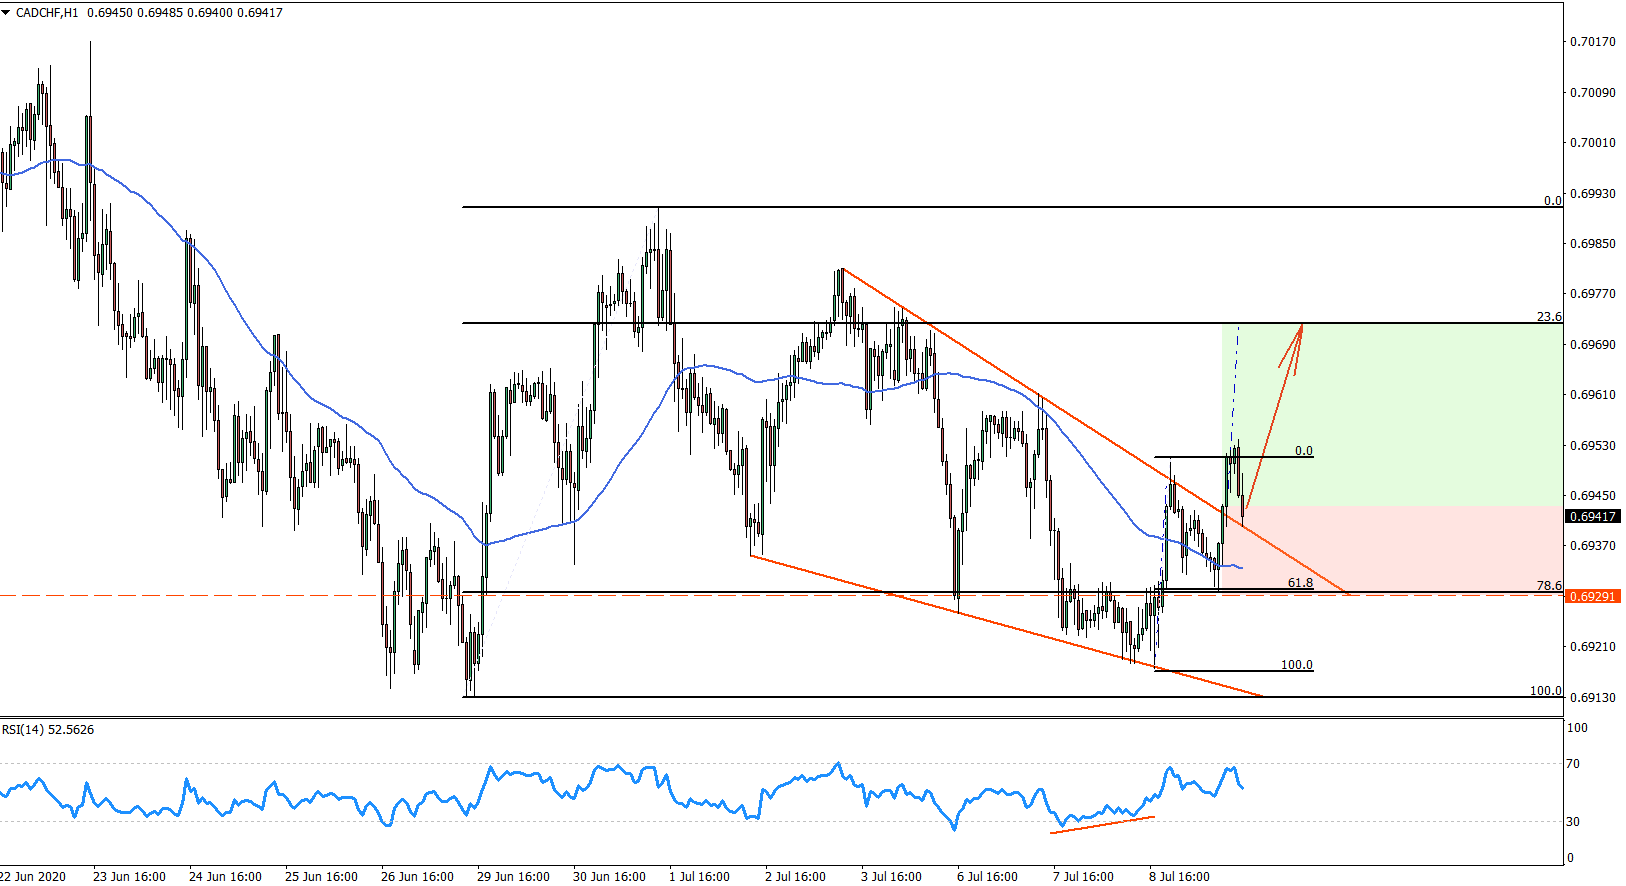 CADCHF Hourly Chart July 9th 2020